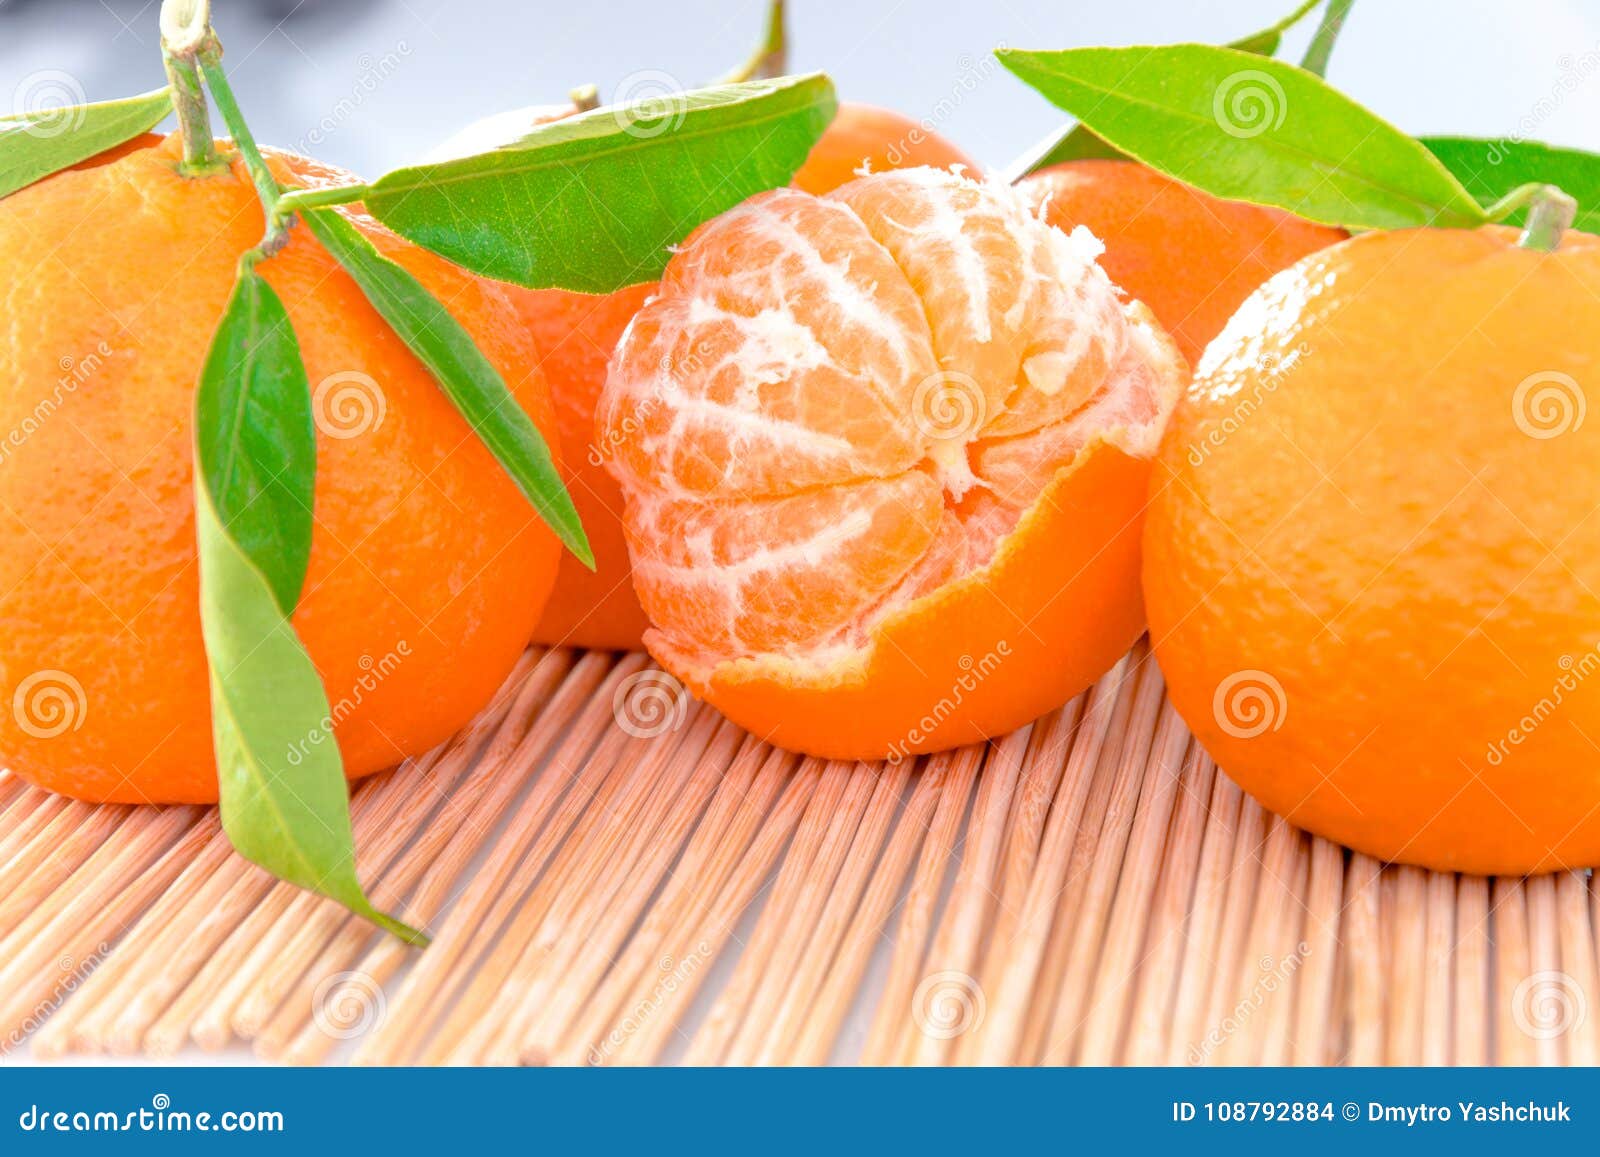 tangerine or clementine with green leaf 